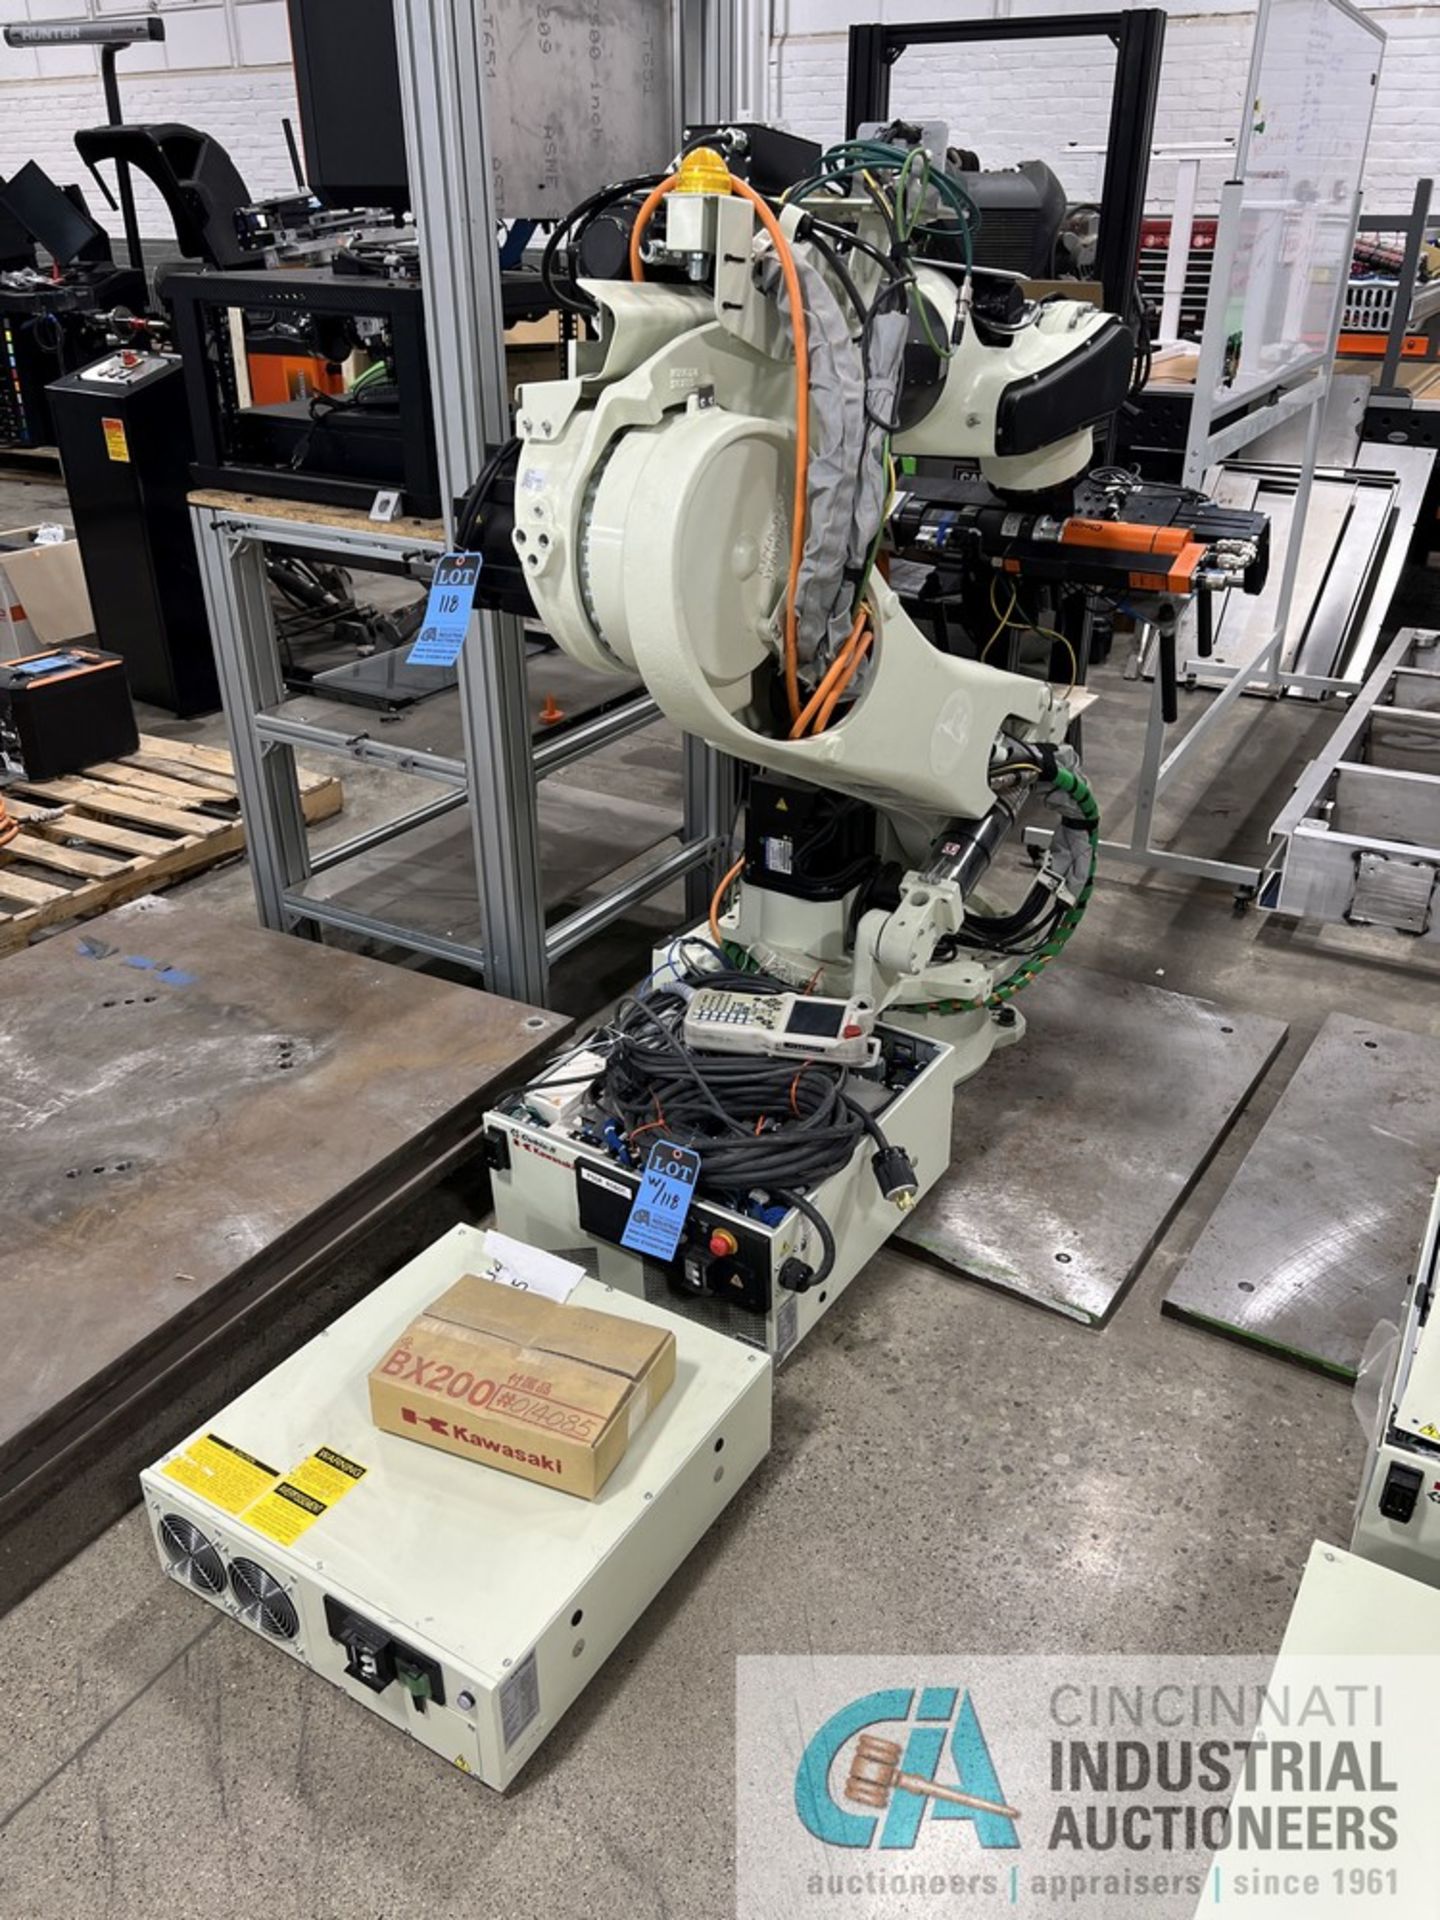 200 KG KAWASAKI MODEL BV200LFE02 6-AXIS ROBOT; S/N BX200014085, WITH CUBIC S CONTROLLER AND TEACH